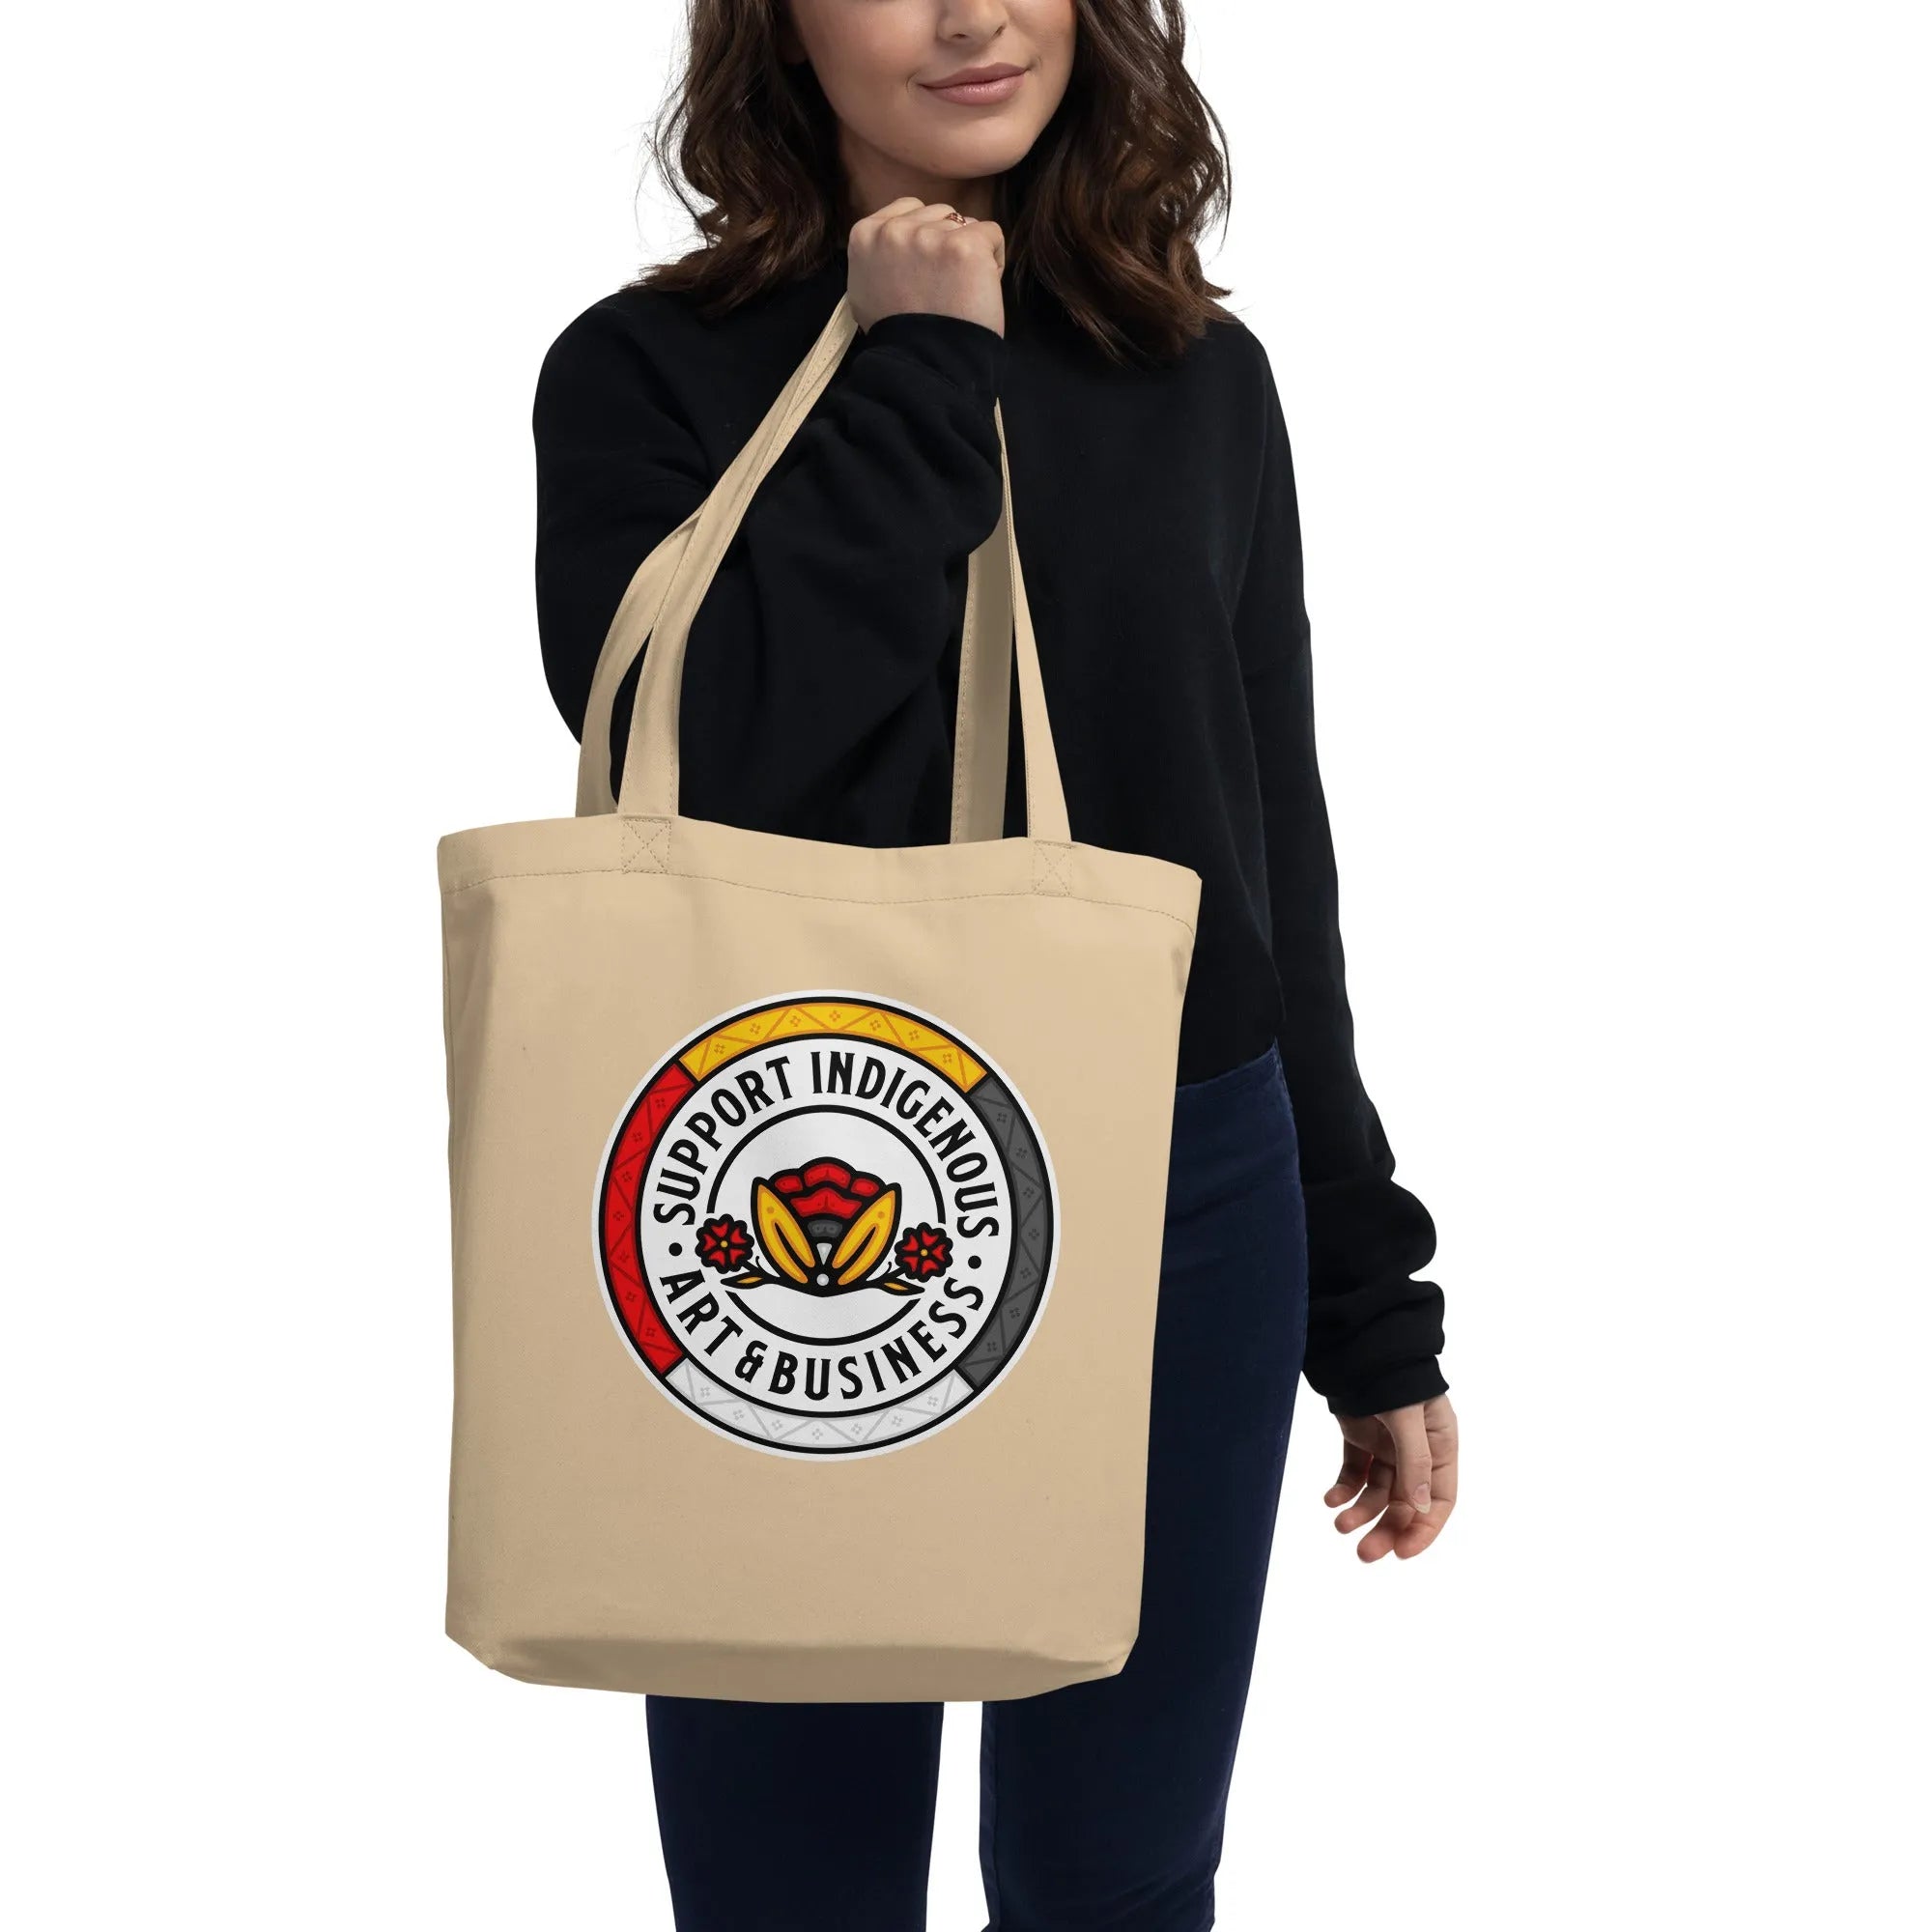 Support Indigenous Art & Business Eco Tote Bag (100% Organic Cotton)